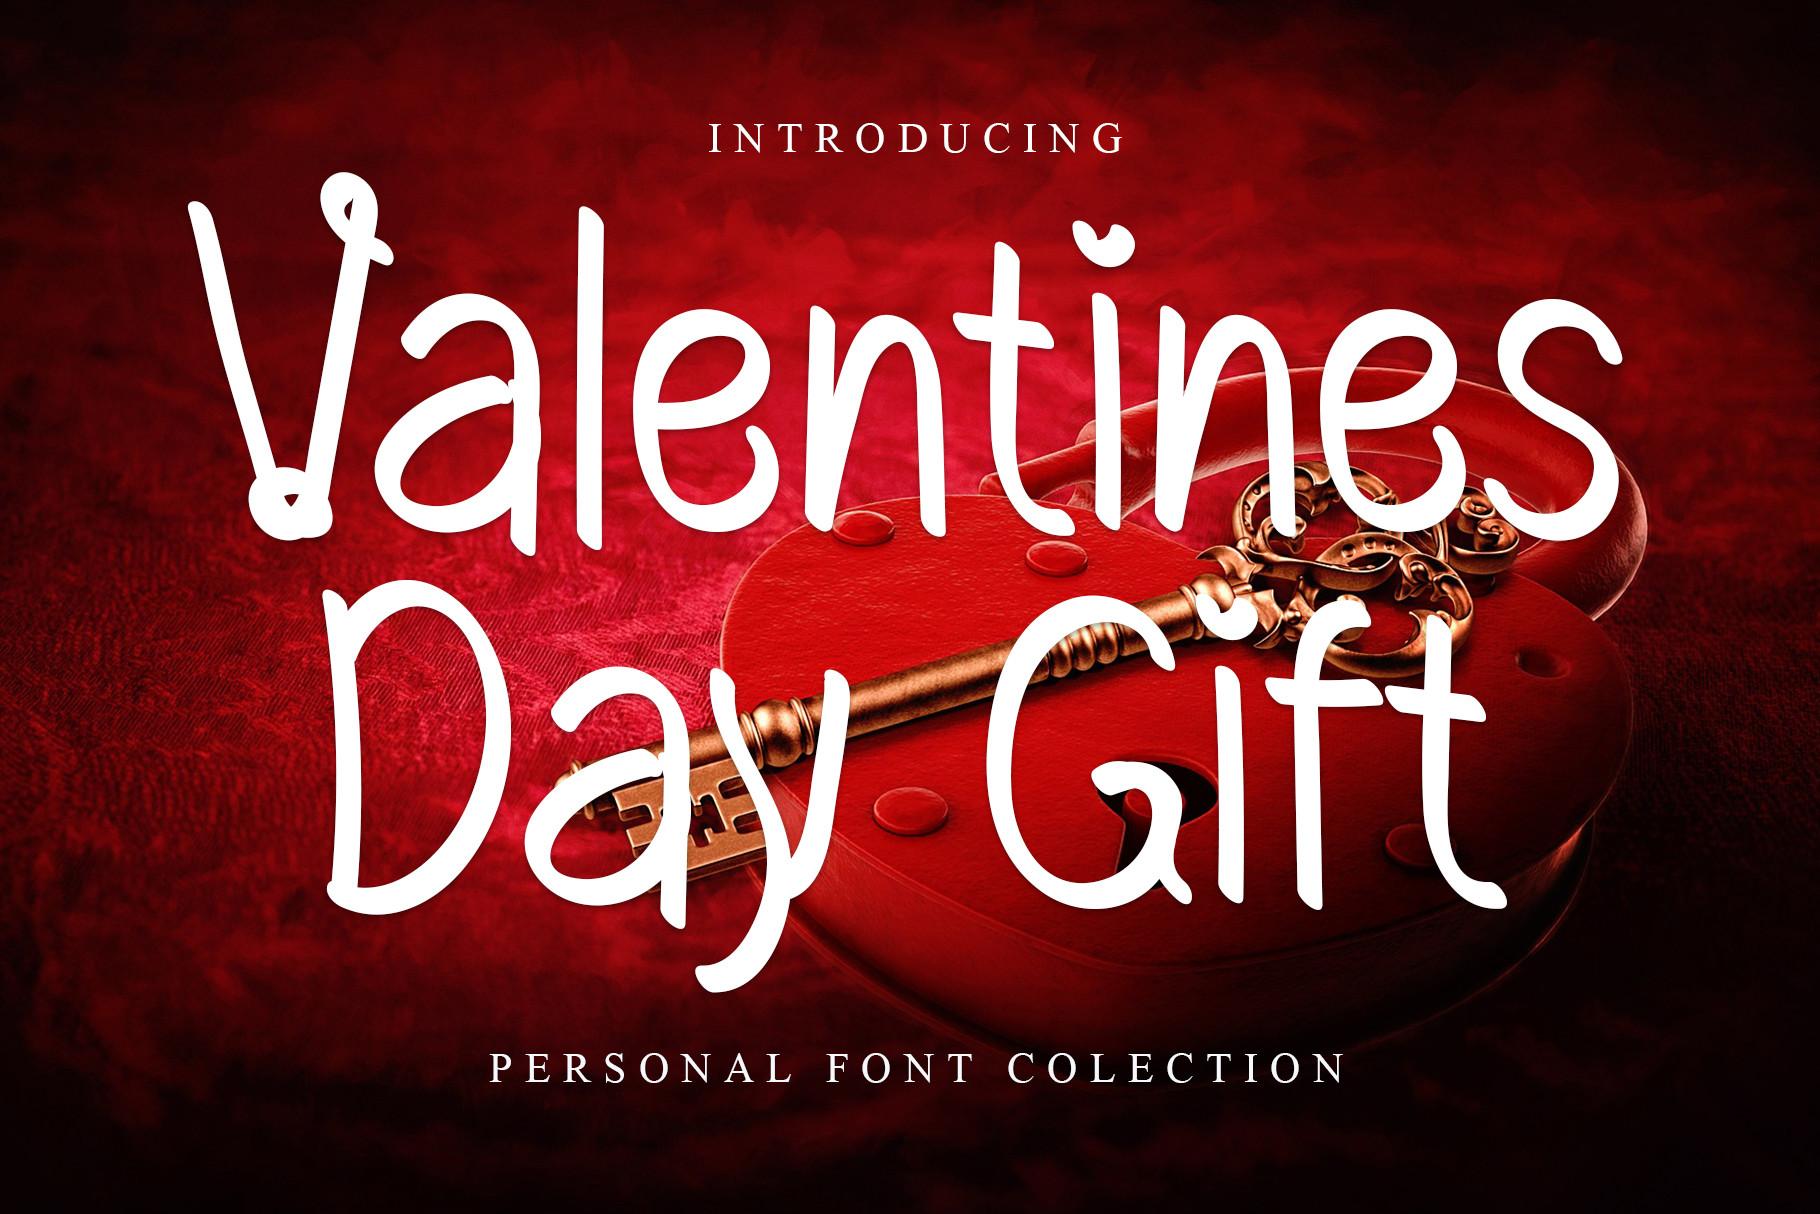 Valentines Day Gift Font